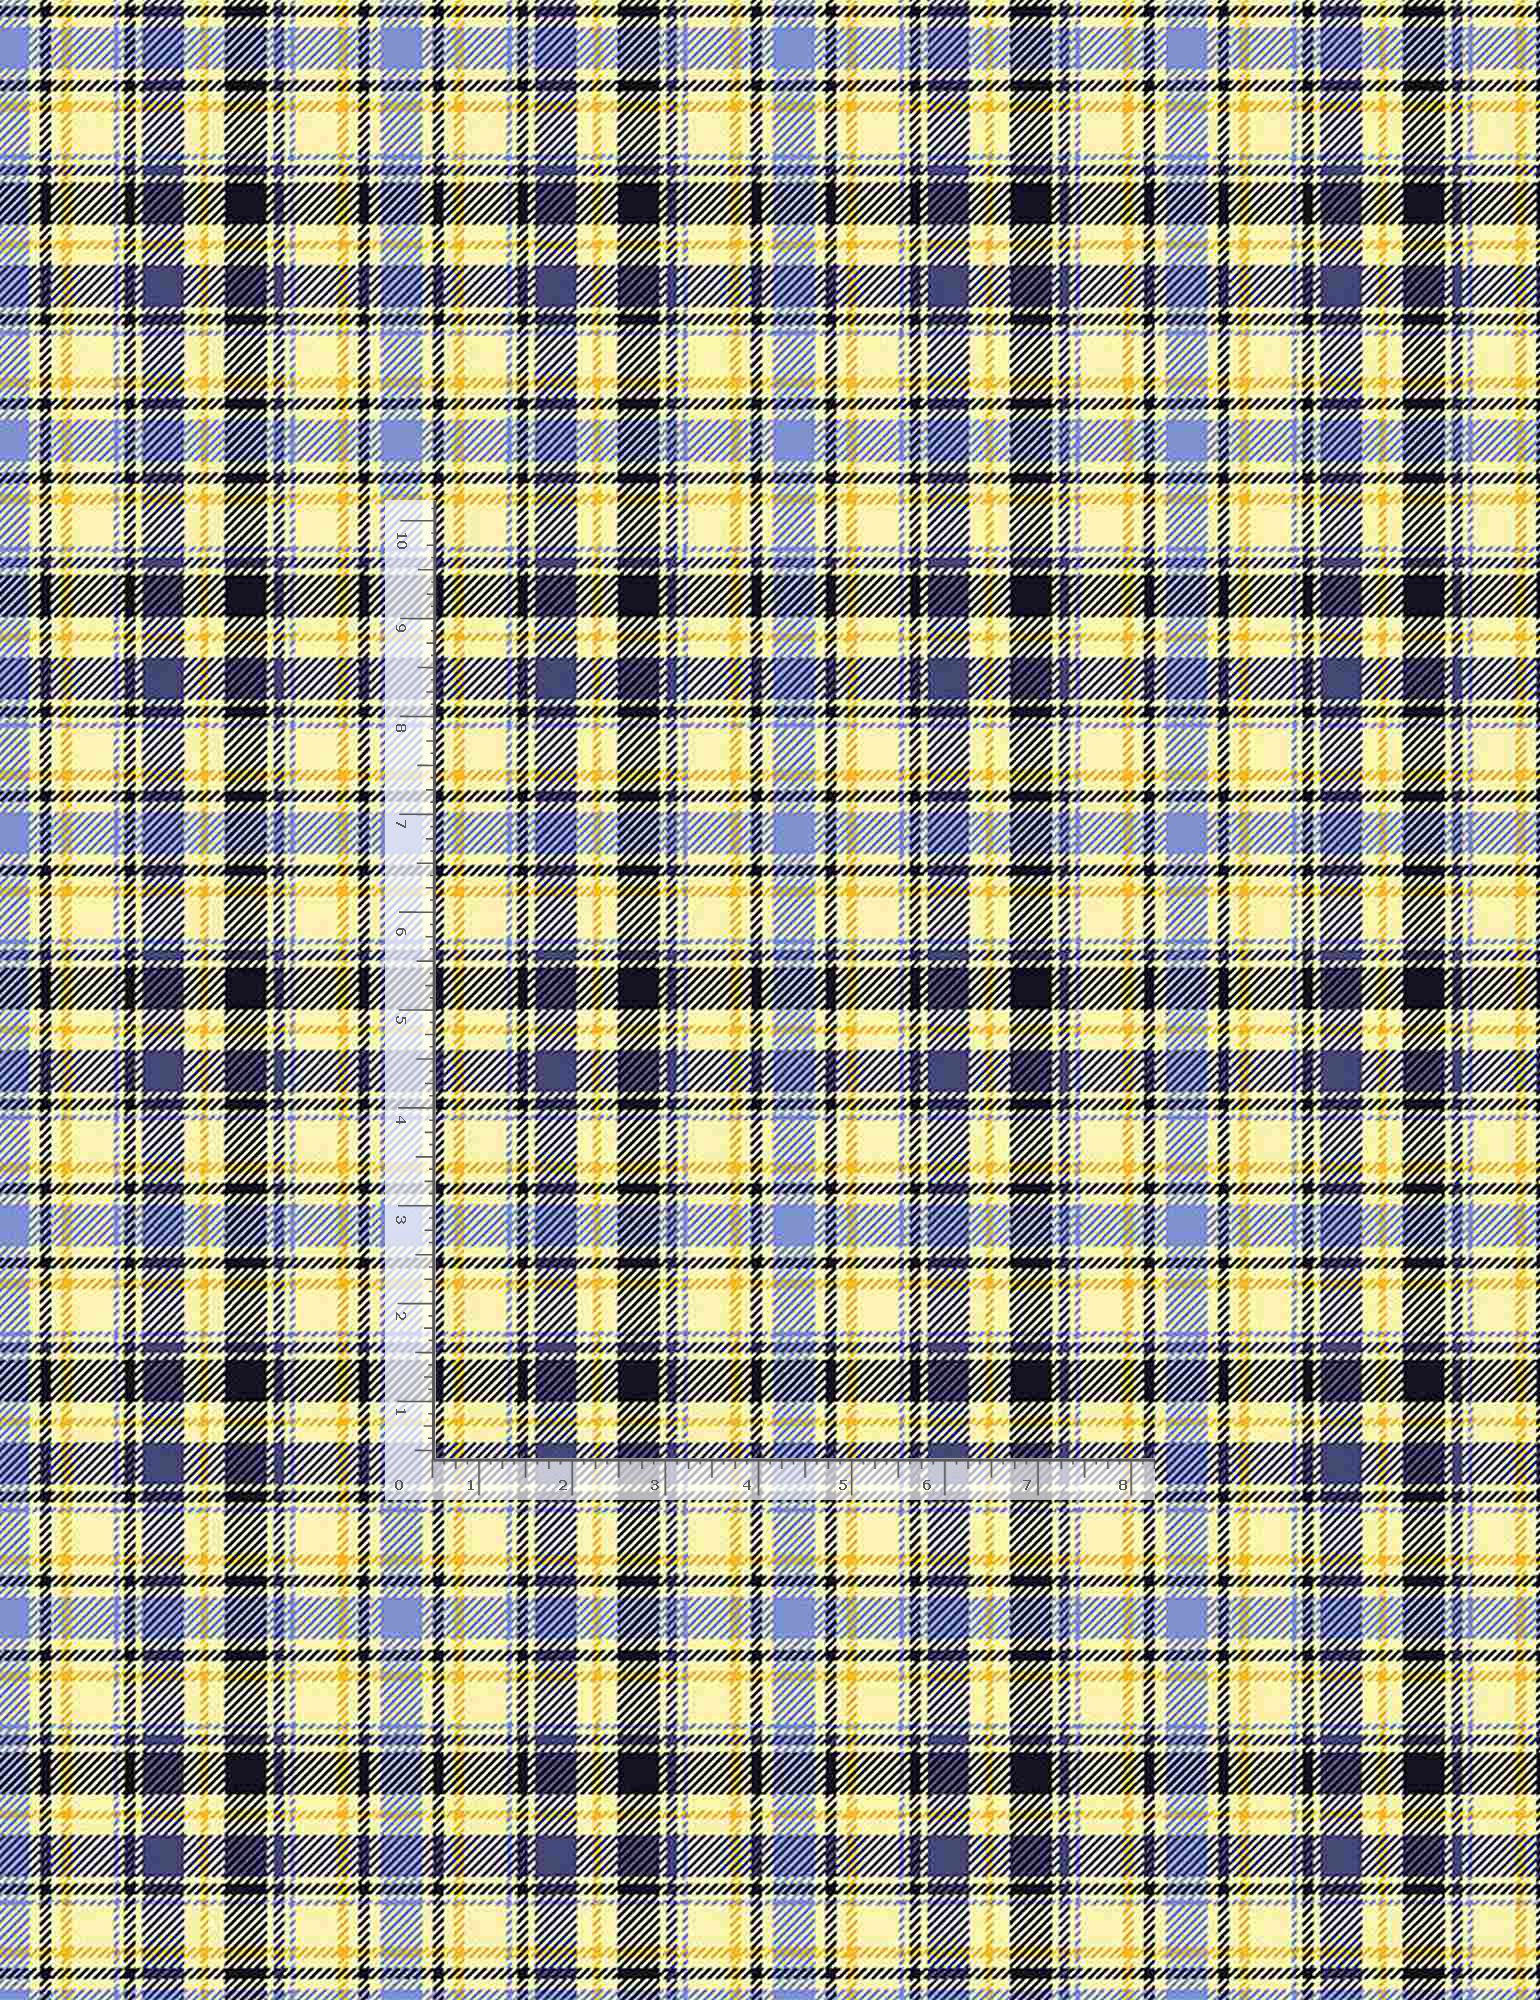 Timeless Treasures To the Moon and Back Yellow Star - Plaid